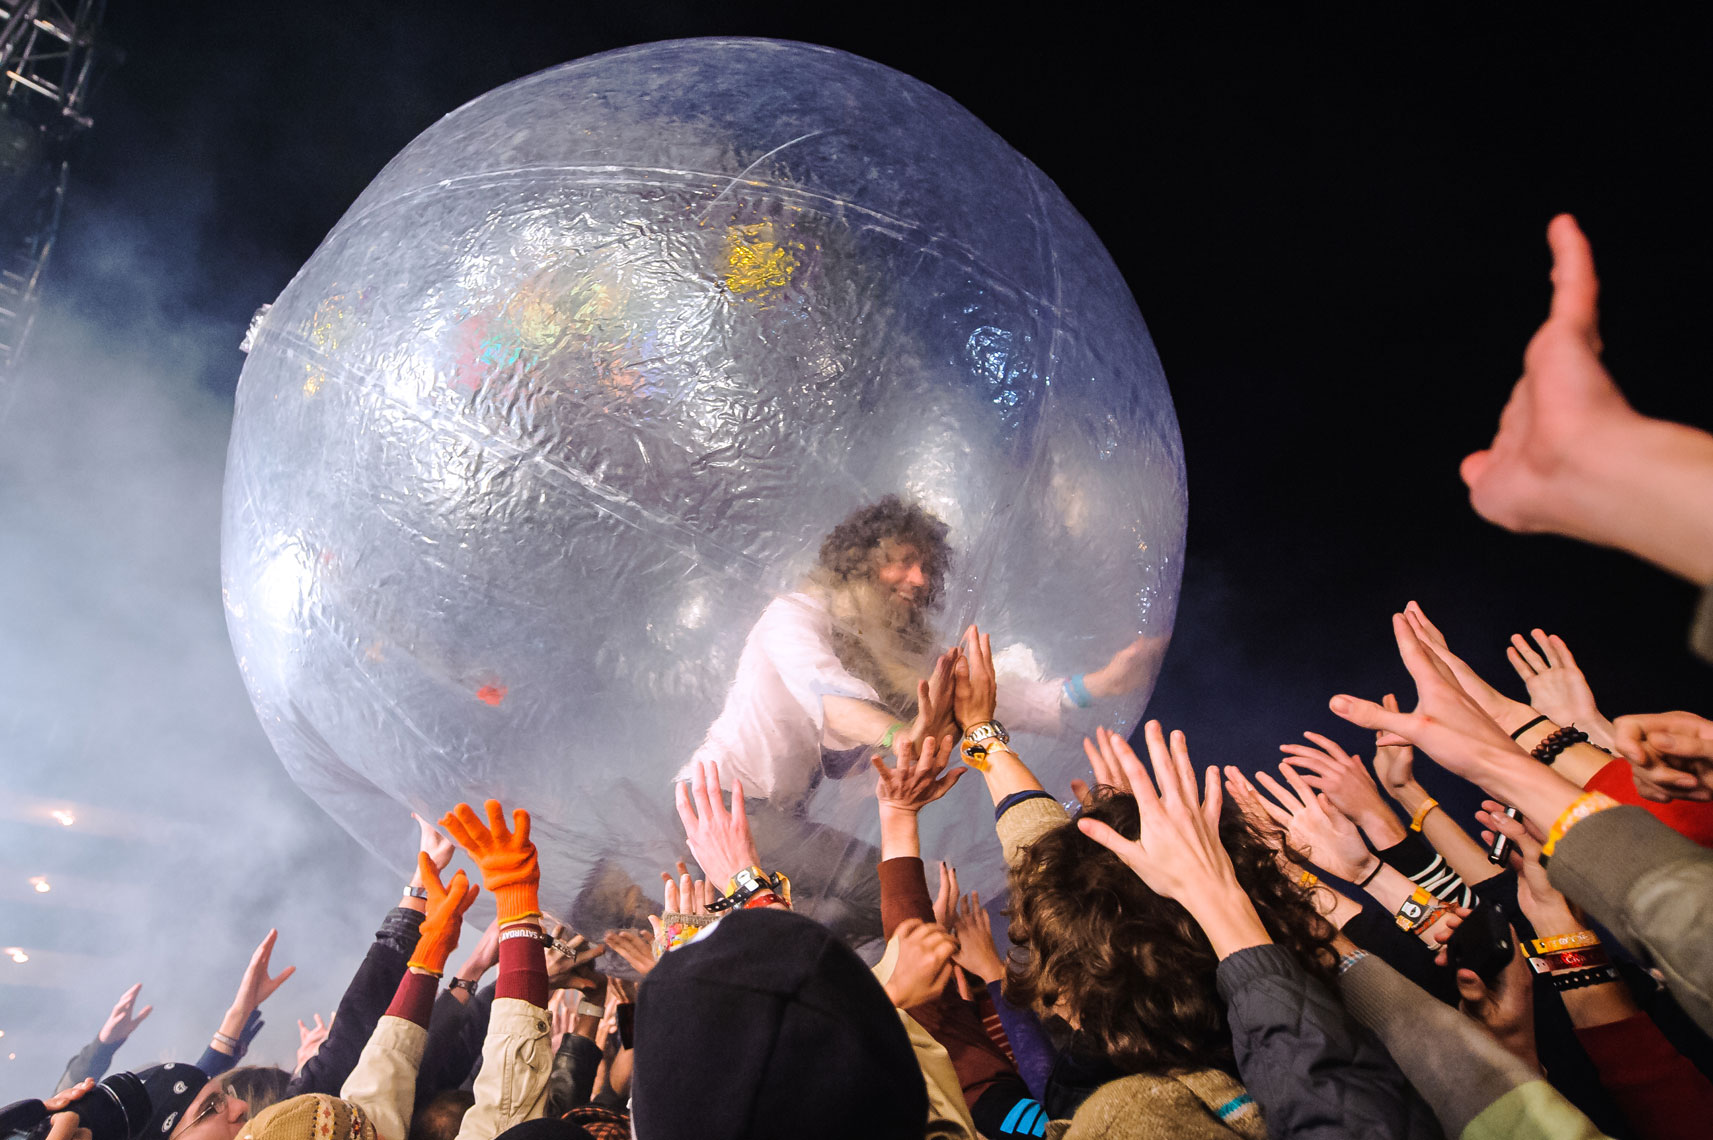 The-Flaming-Lips-play-the-Animoog-Playground-at-Moogfest-on-Saturday,-October-29,-2011-6